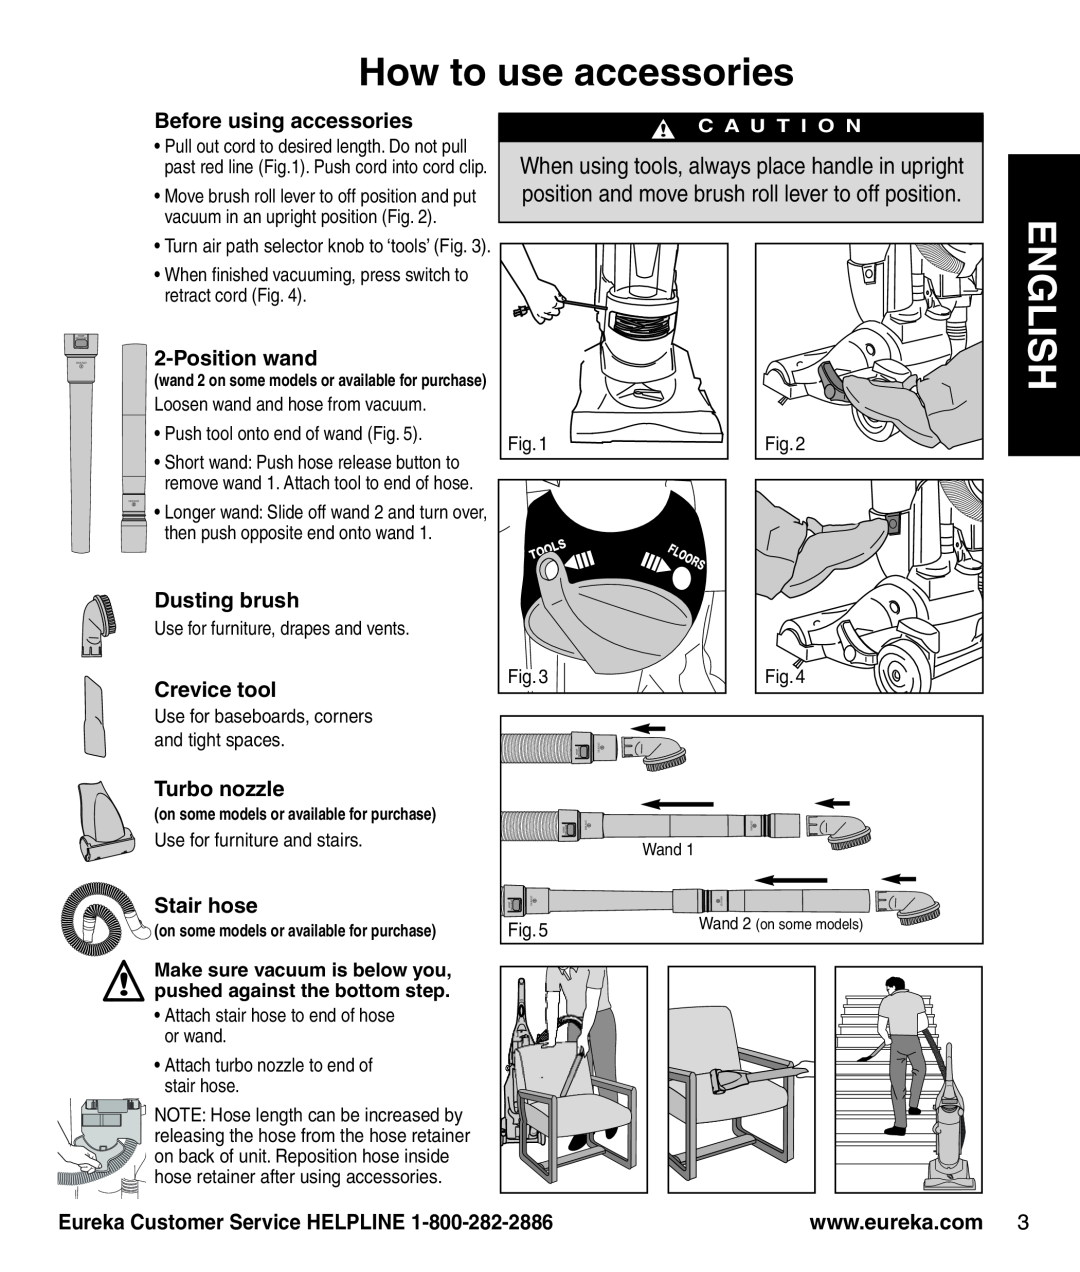 Eureka AS1001A manual How to use accessories, Position wand, Dusting brush, Crevice tool, Turbo nozzle, Stair hose, English 